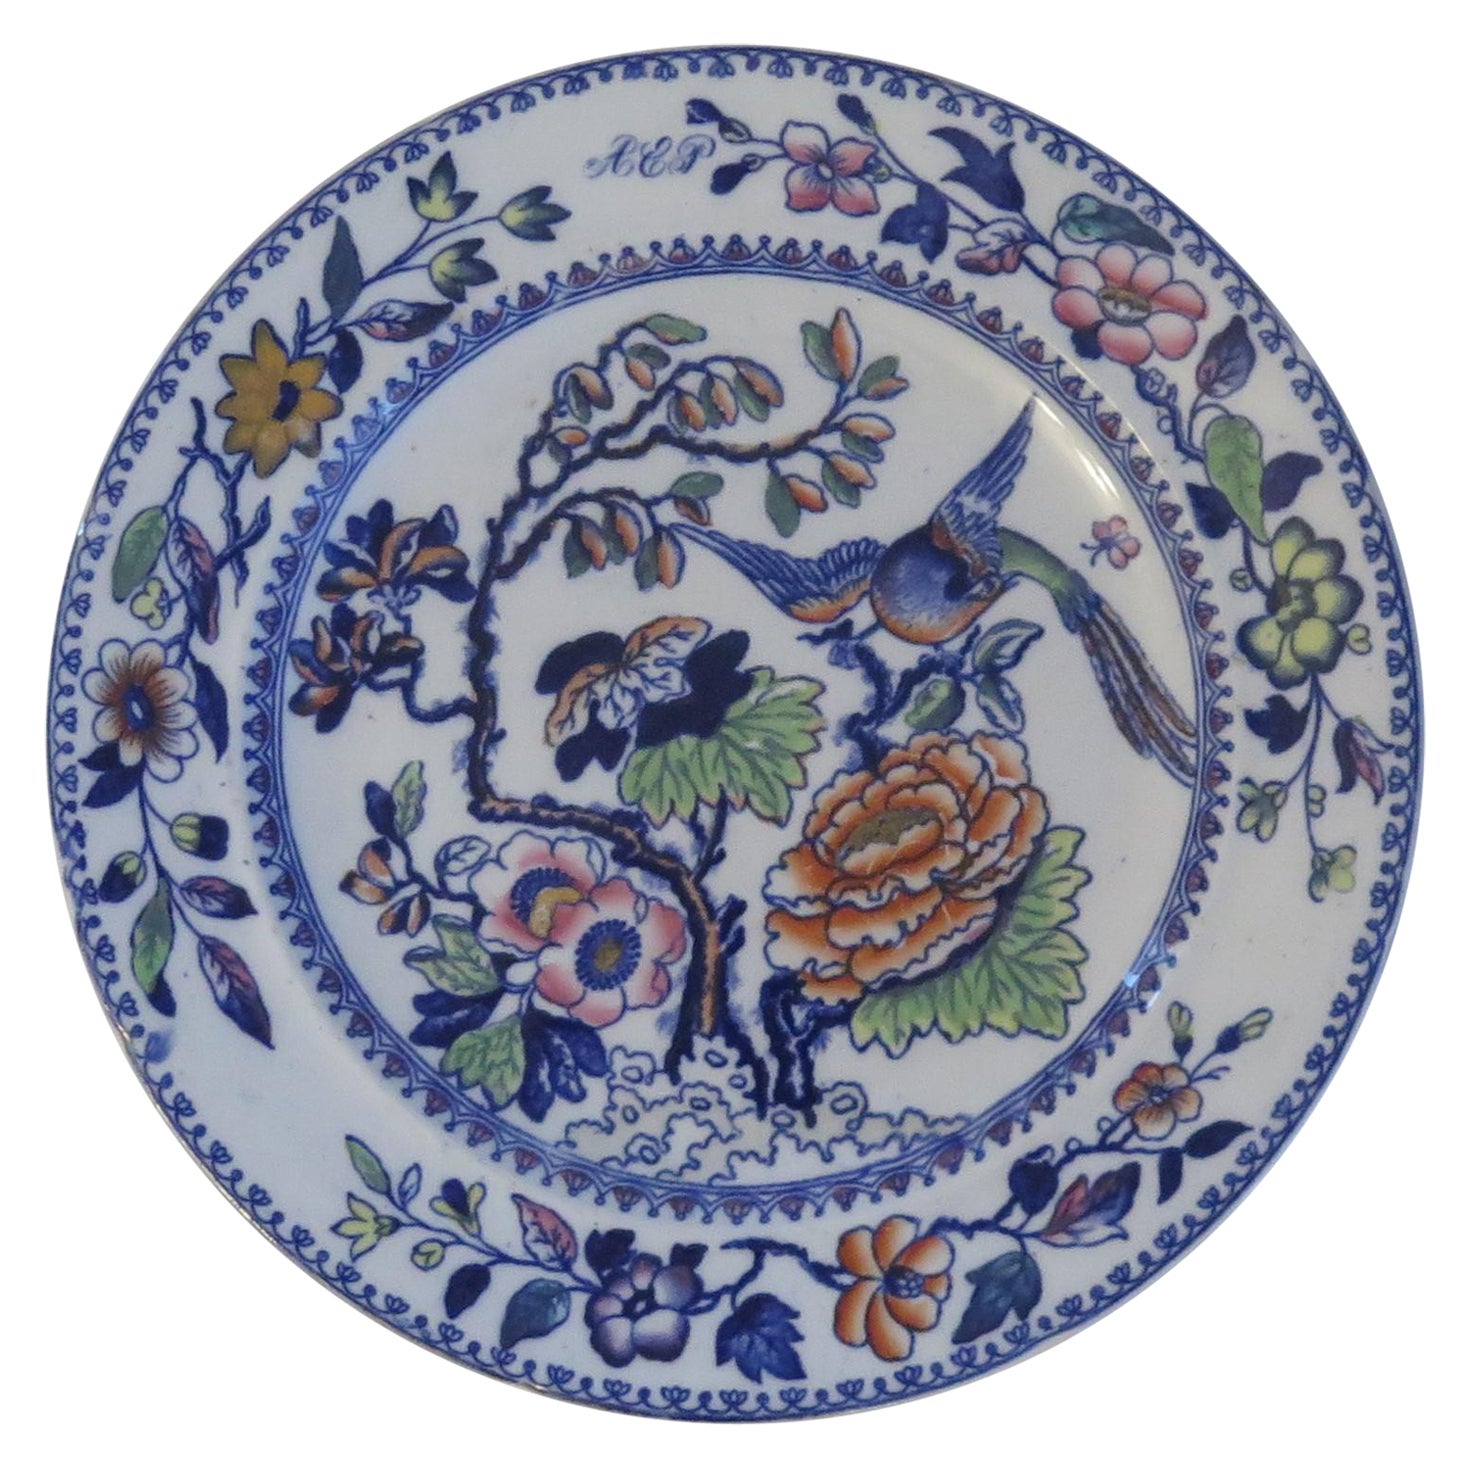 Mason's Ashworth's Ironstone Large Dinner Plate in Flying Bird Pattern, Ca 1870 For Sale